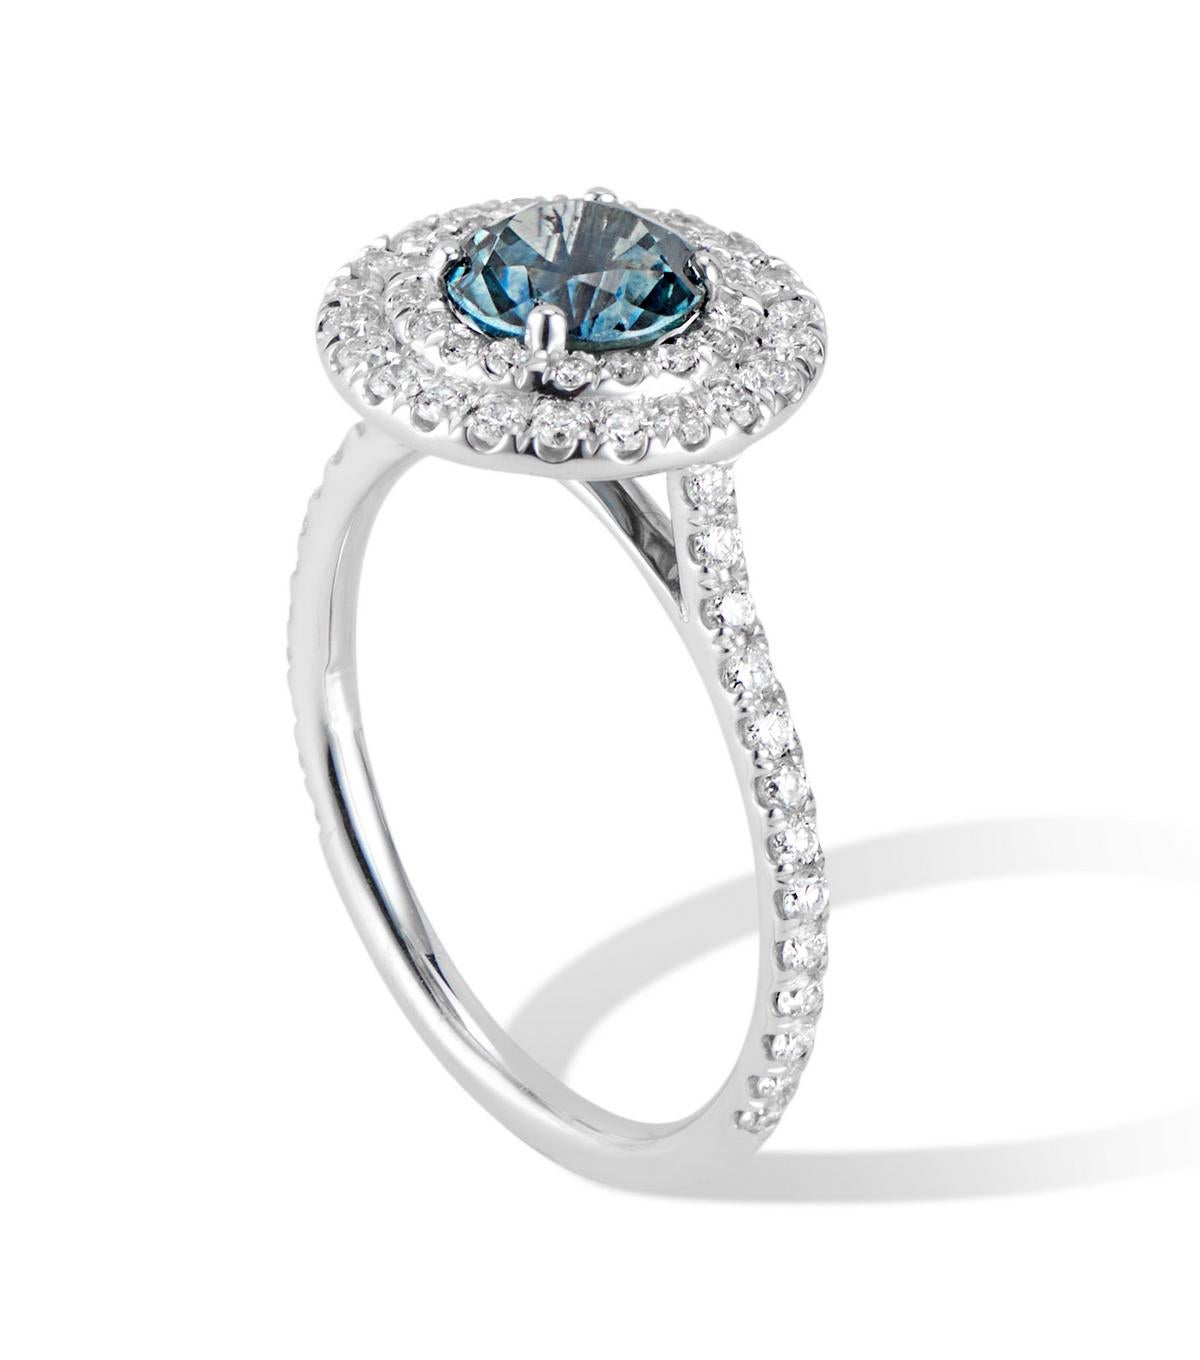 This 18K White Gold Double Diamond Halo Montana Sapphire Ring is a statement of luxury, with it’s sparkling pave and unique teal blue Montana Sapphire.

Ideal if you are looking for a blue Sapphire ring but maybe an update on the classic, this could